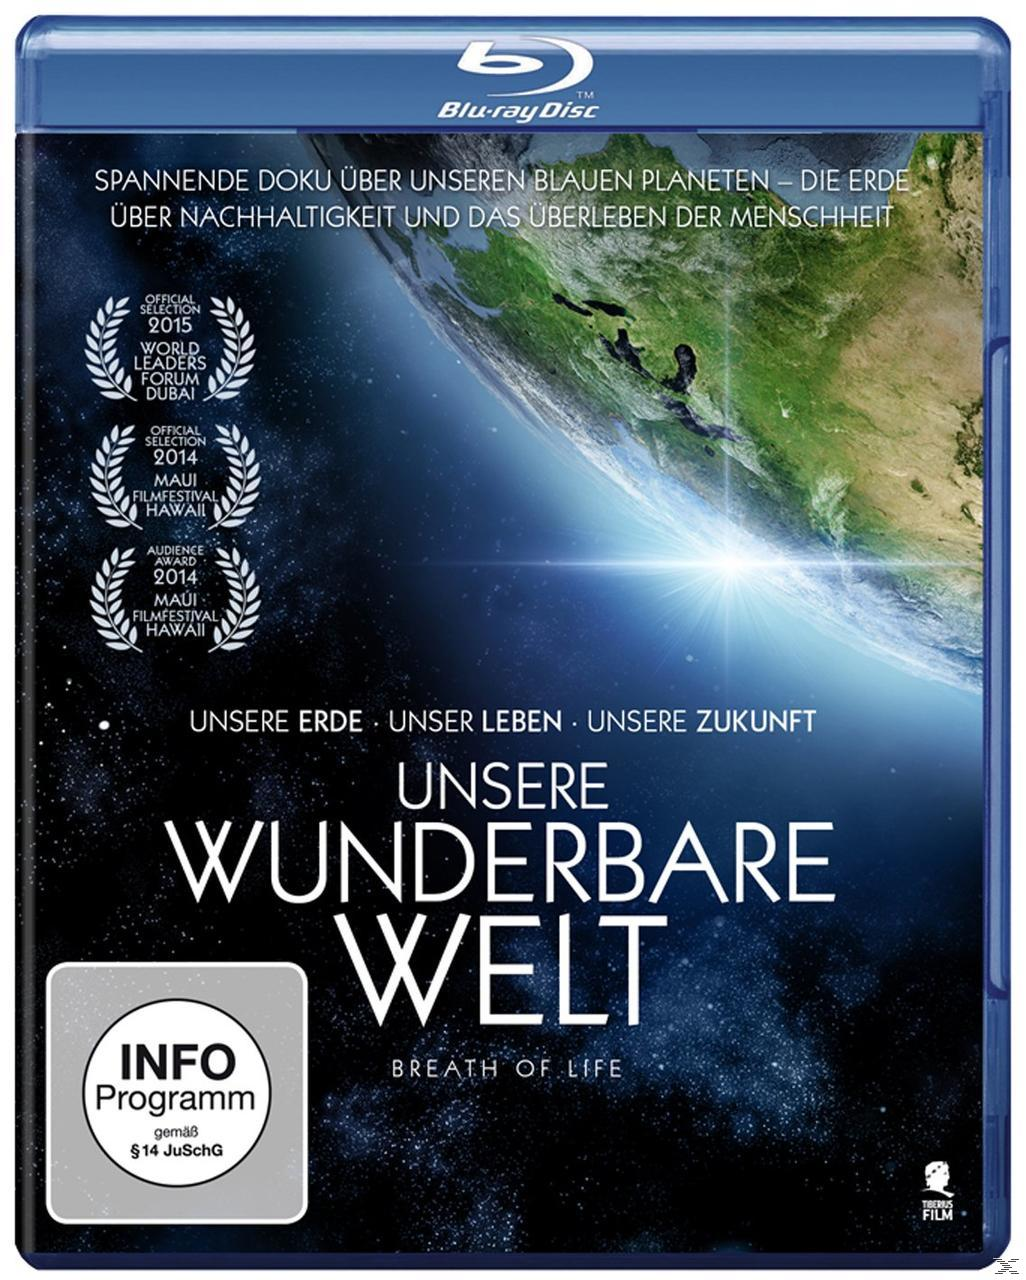 Blu-ray Welt Unsere Life of Breath wunderbare -